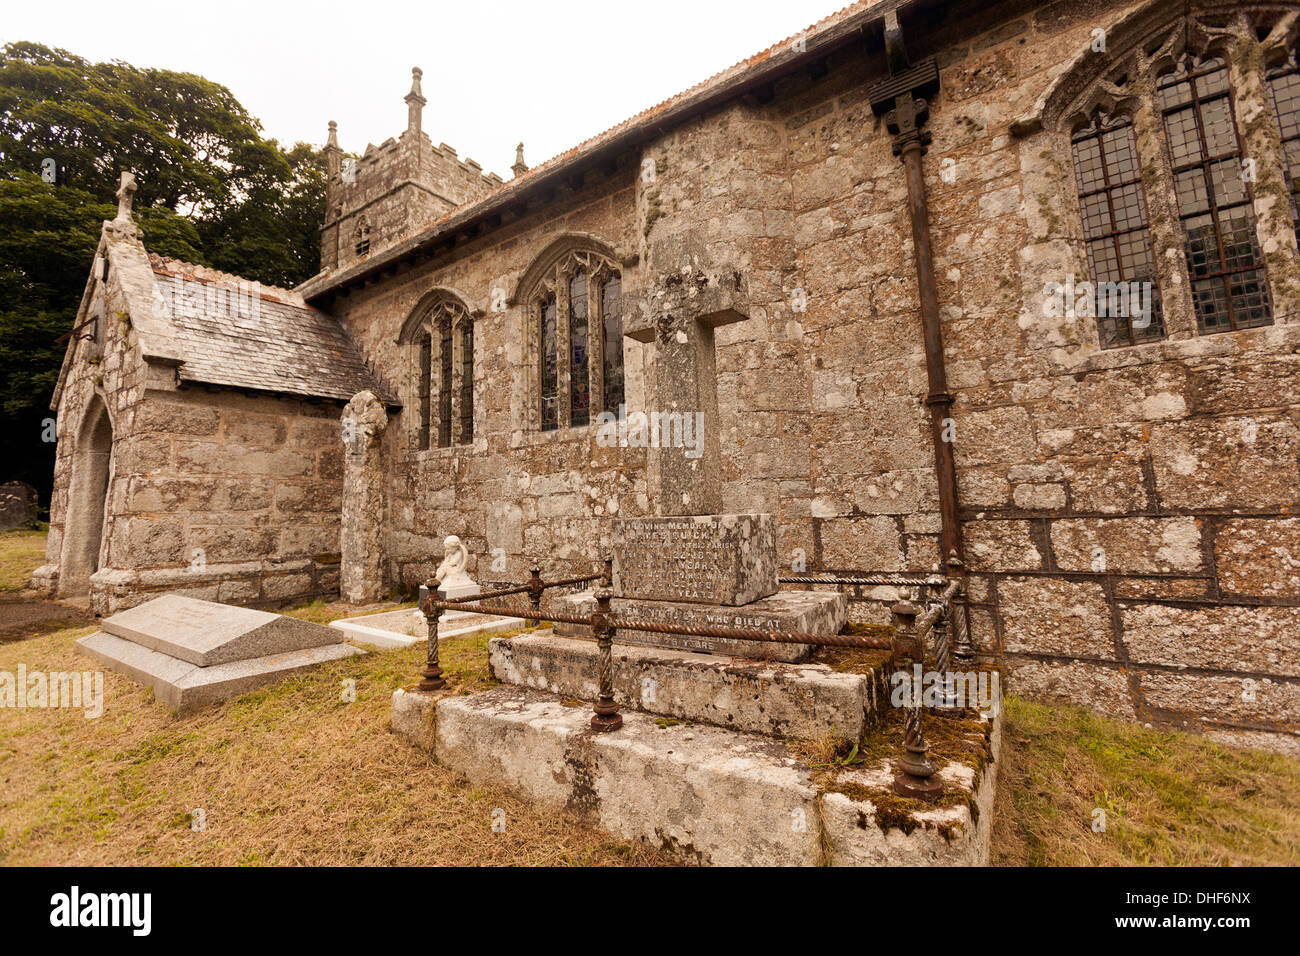 Outside of the Sancreed Churchyard in Cornwall, England, United Kingdom. Stock Photo